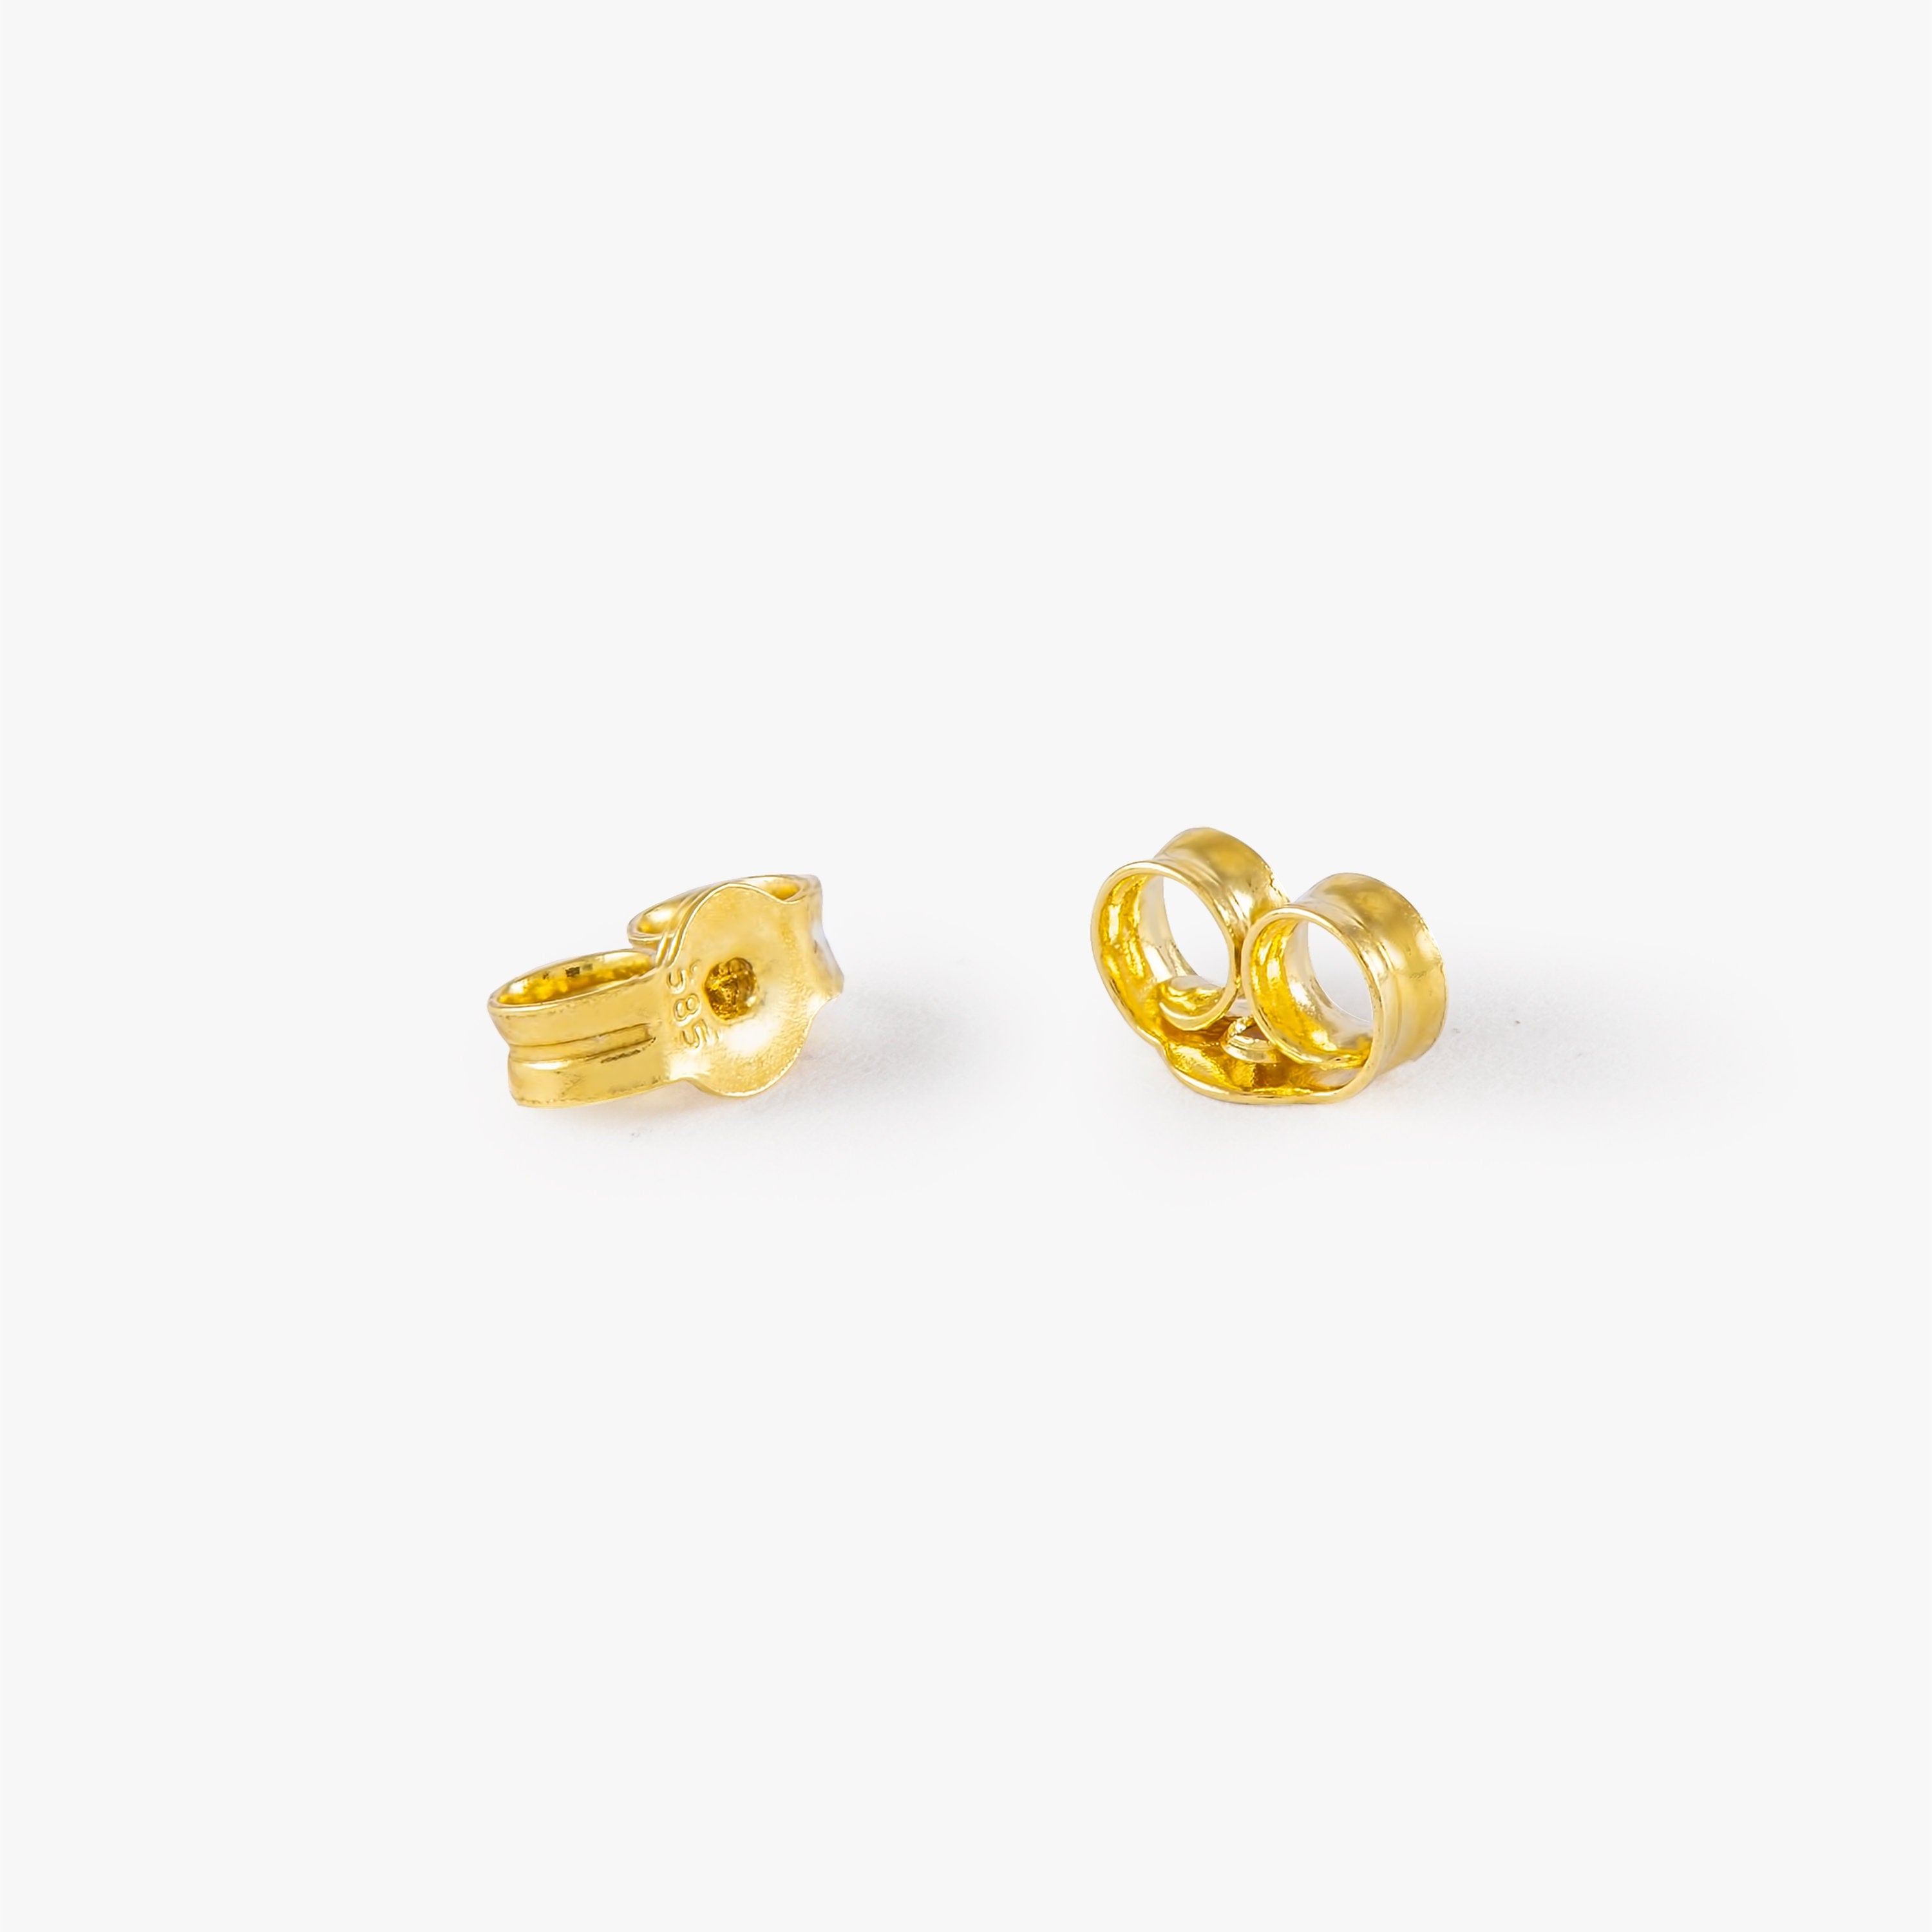 Marquise Diamond Earrings Available in 14K and 18K Gold